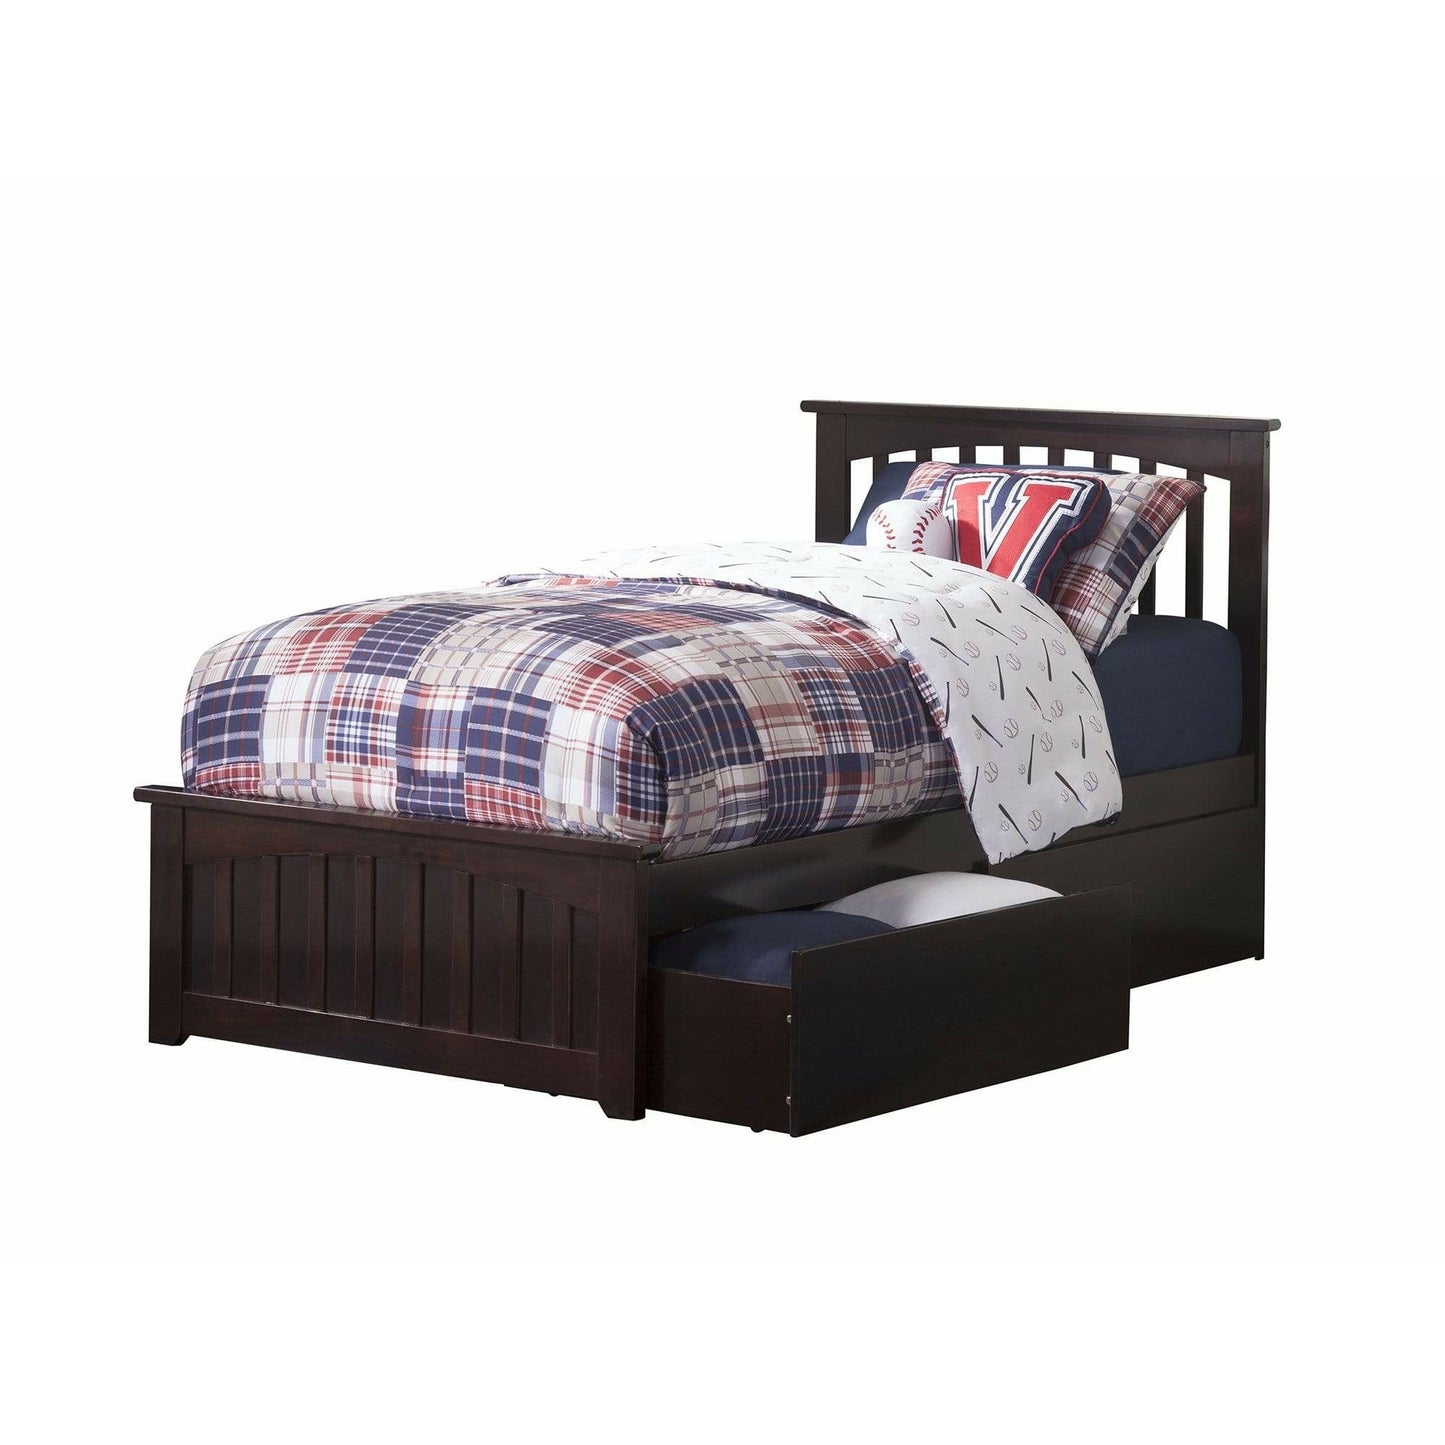 Atlantic Furniture Bed Espresso Mission Twin Platform Bed with Matching Foot Board with 2 Urban Bed Drawers in Espresso